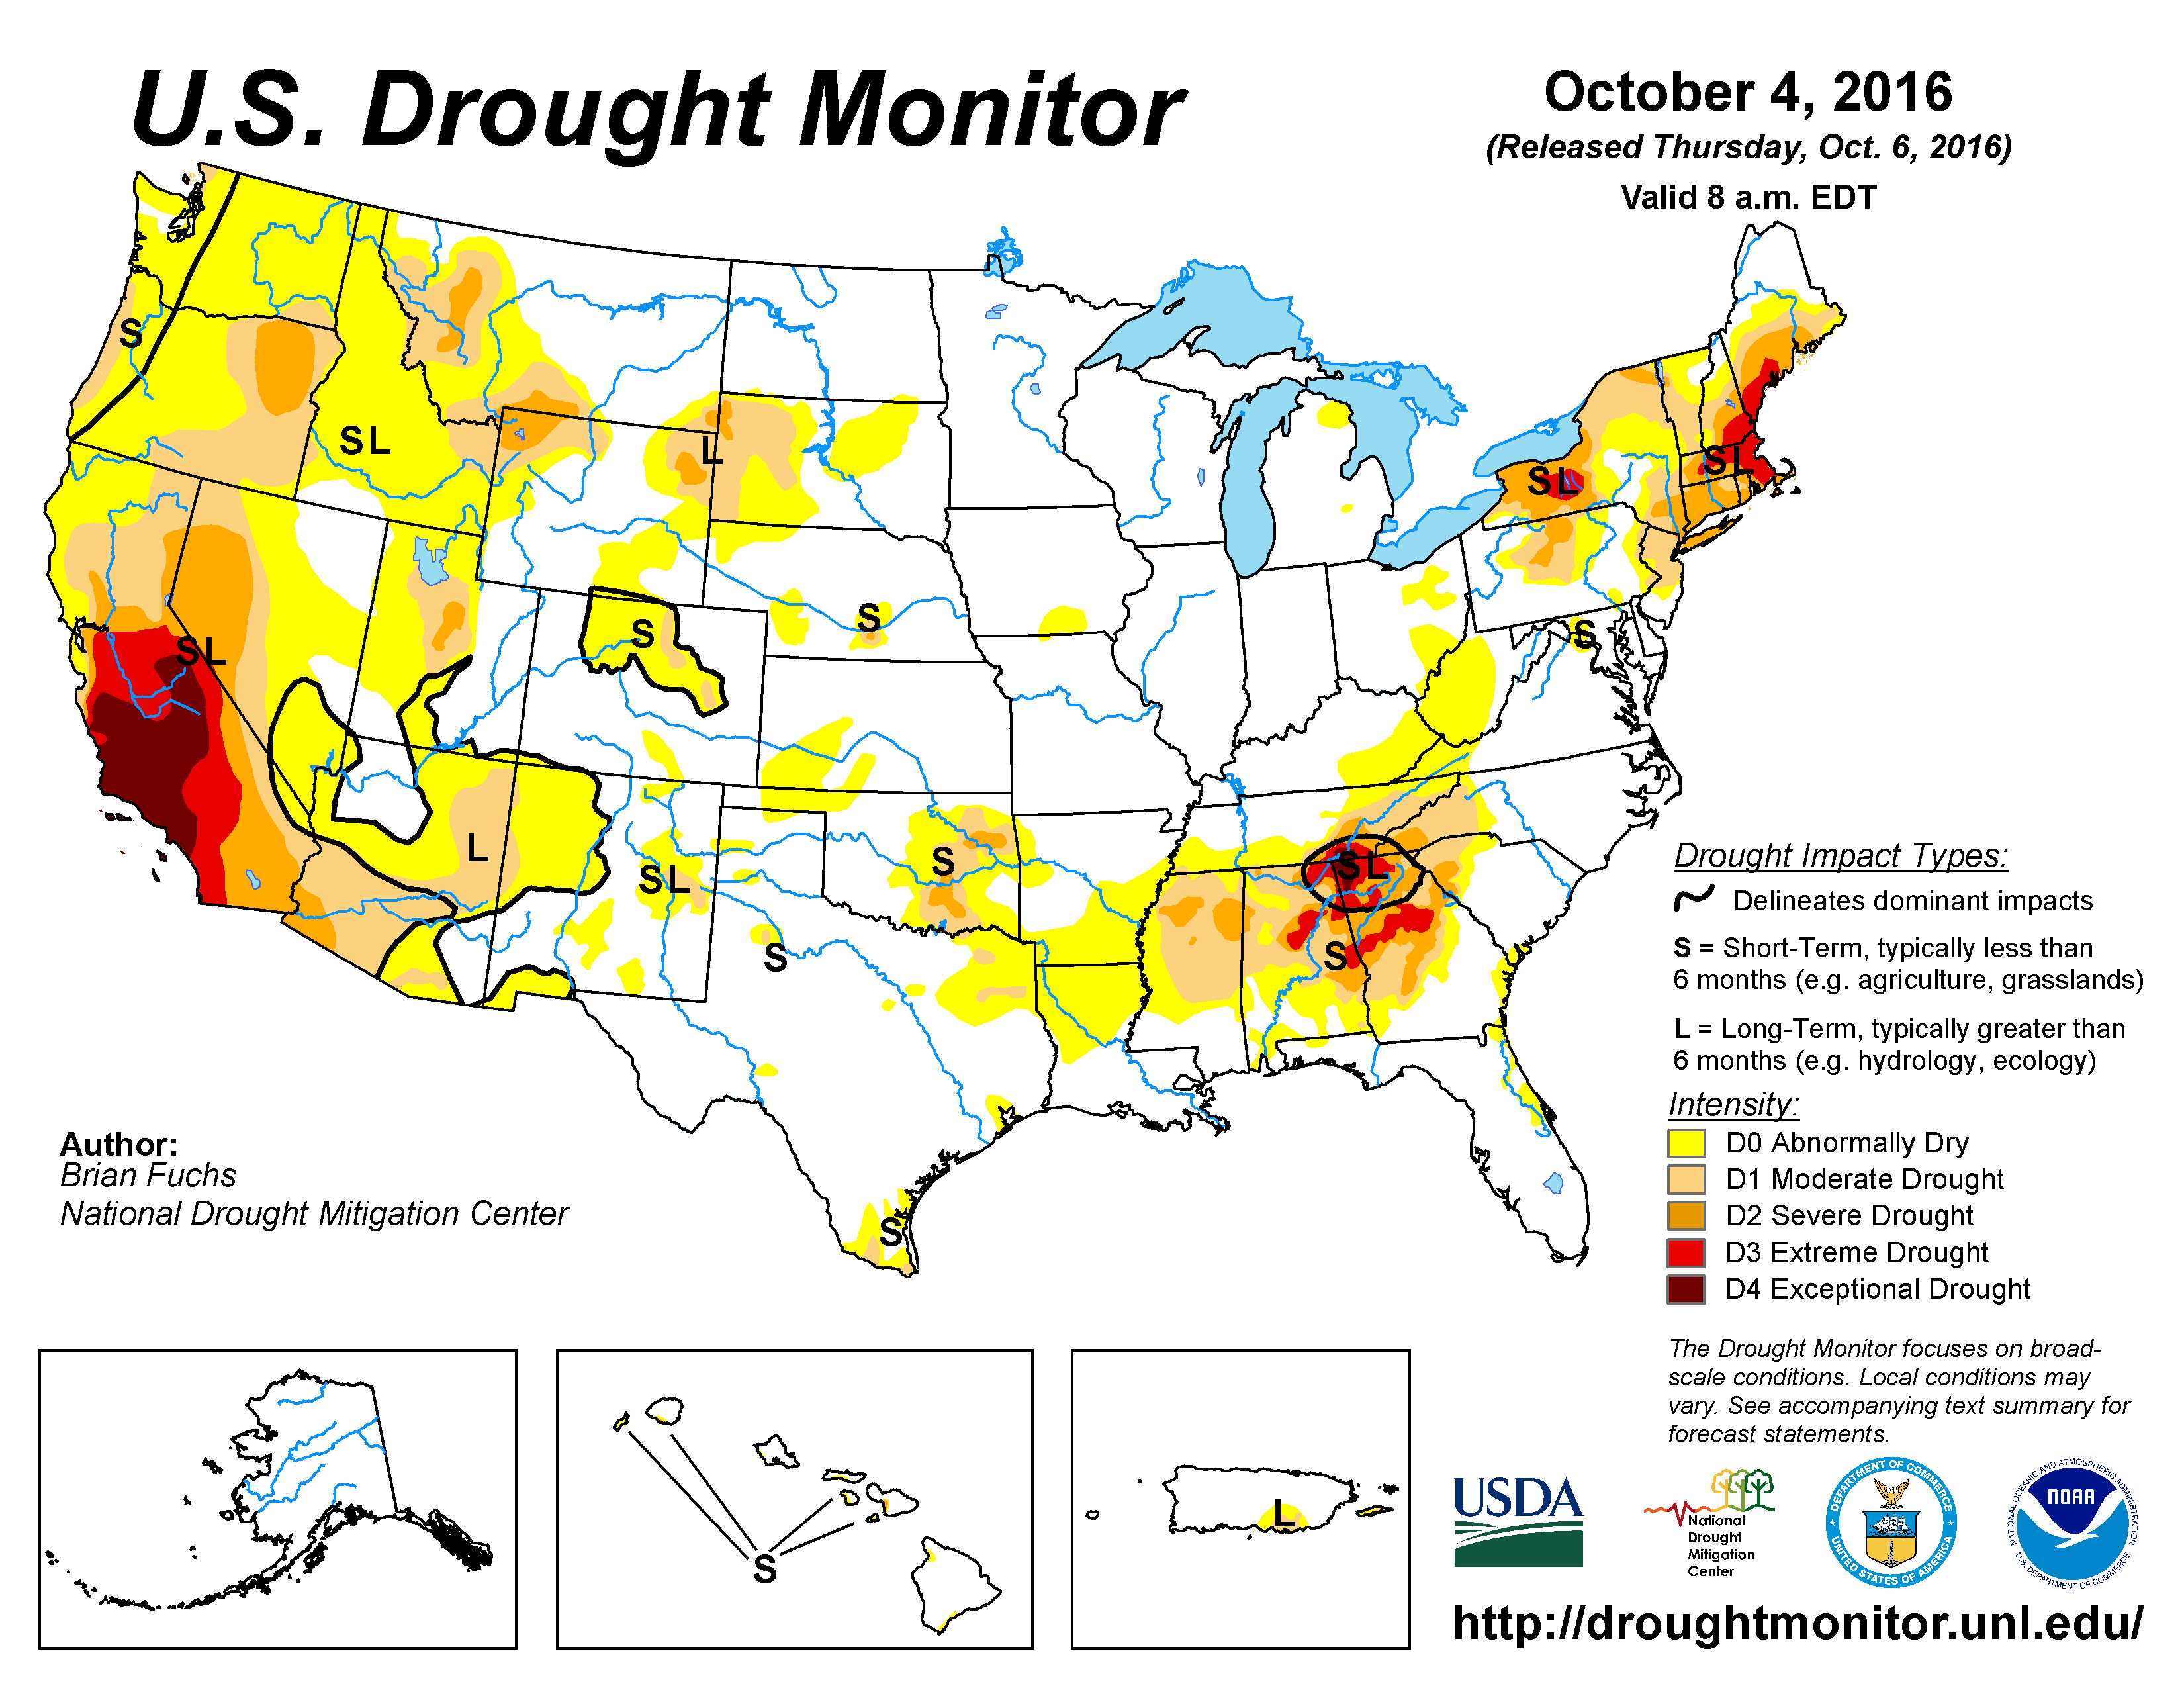 The U.S. Drought Monitor drought map valid October 4, 2016